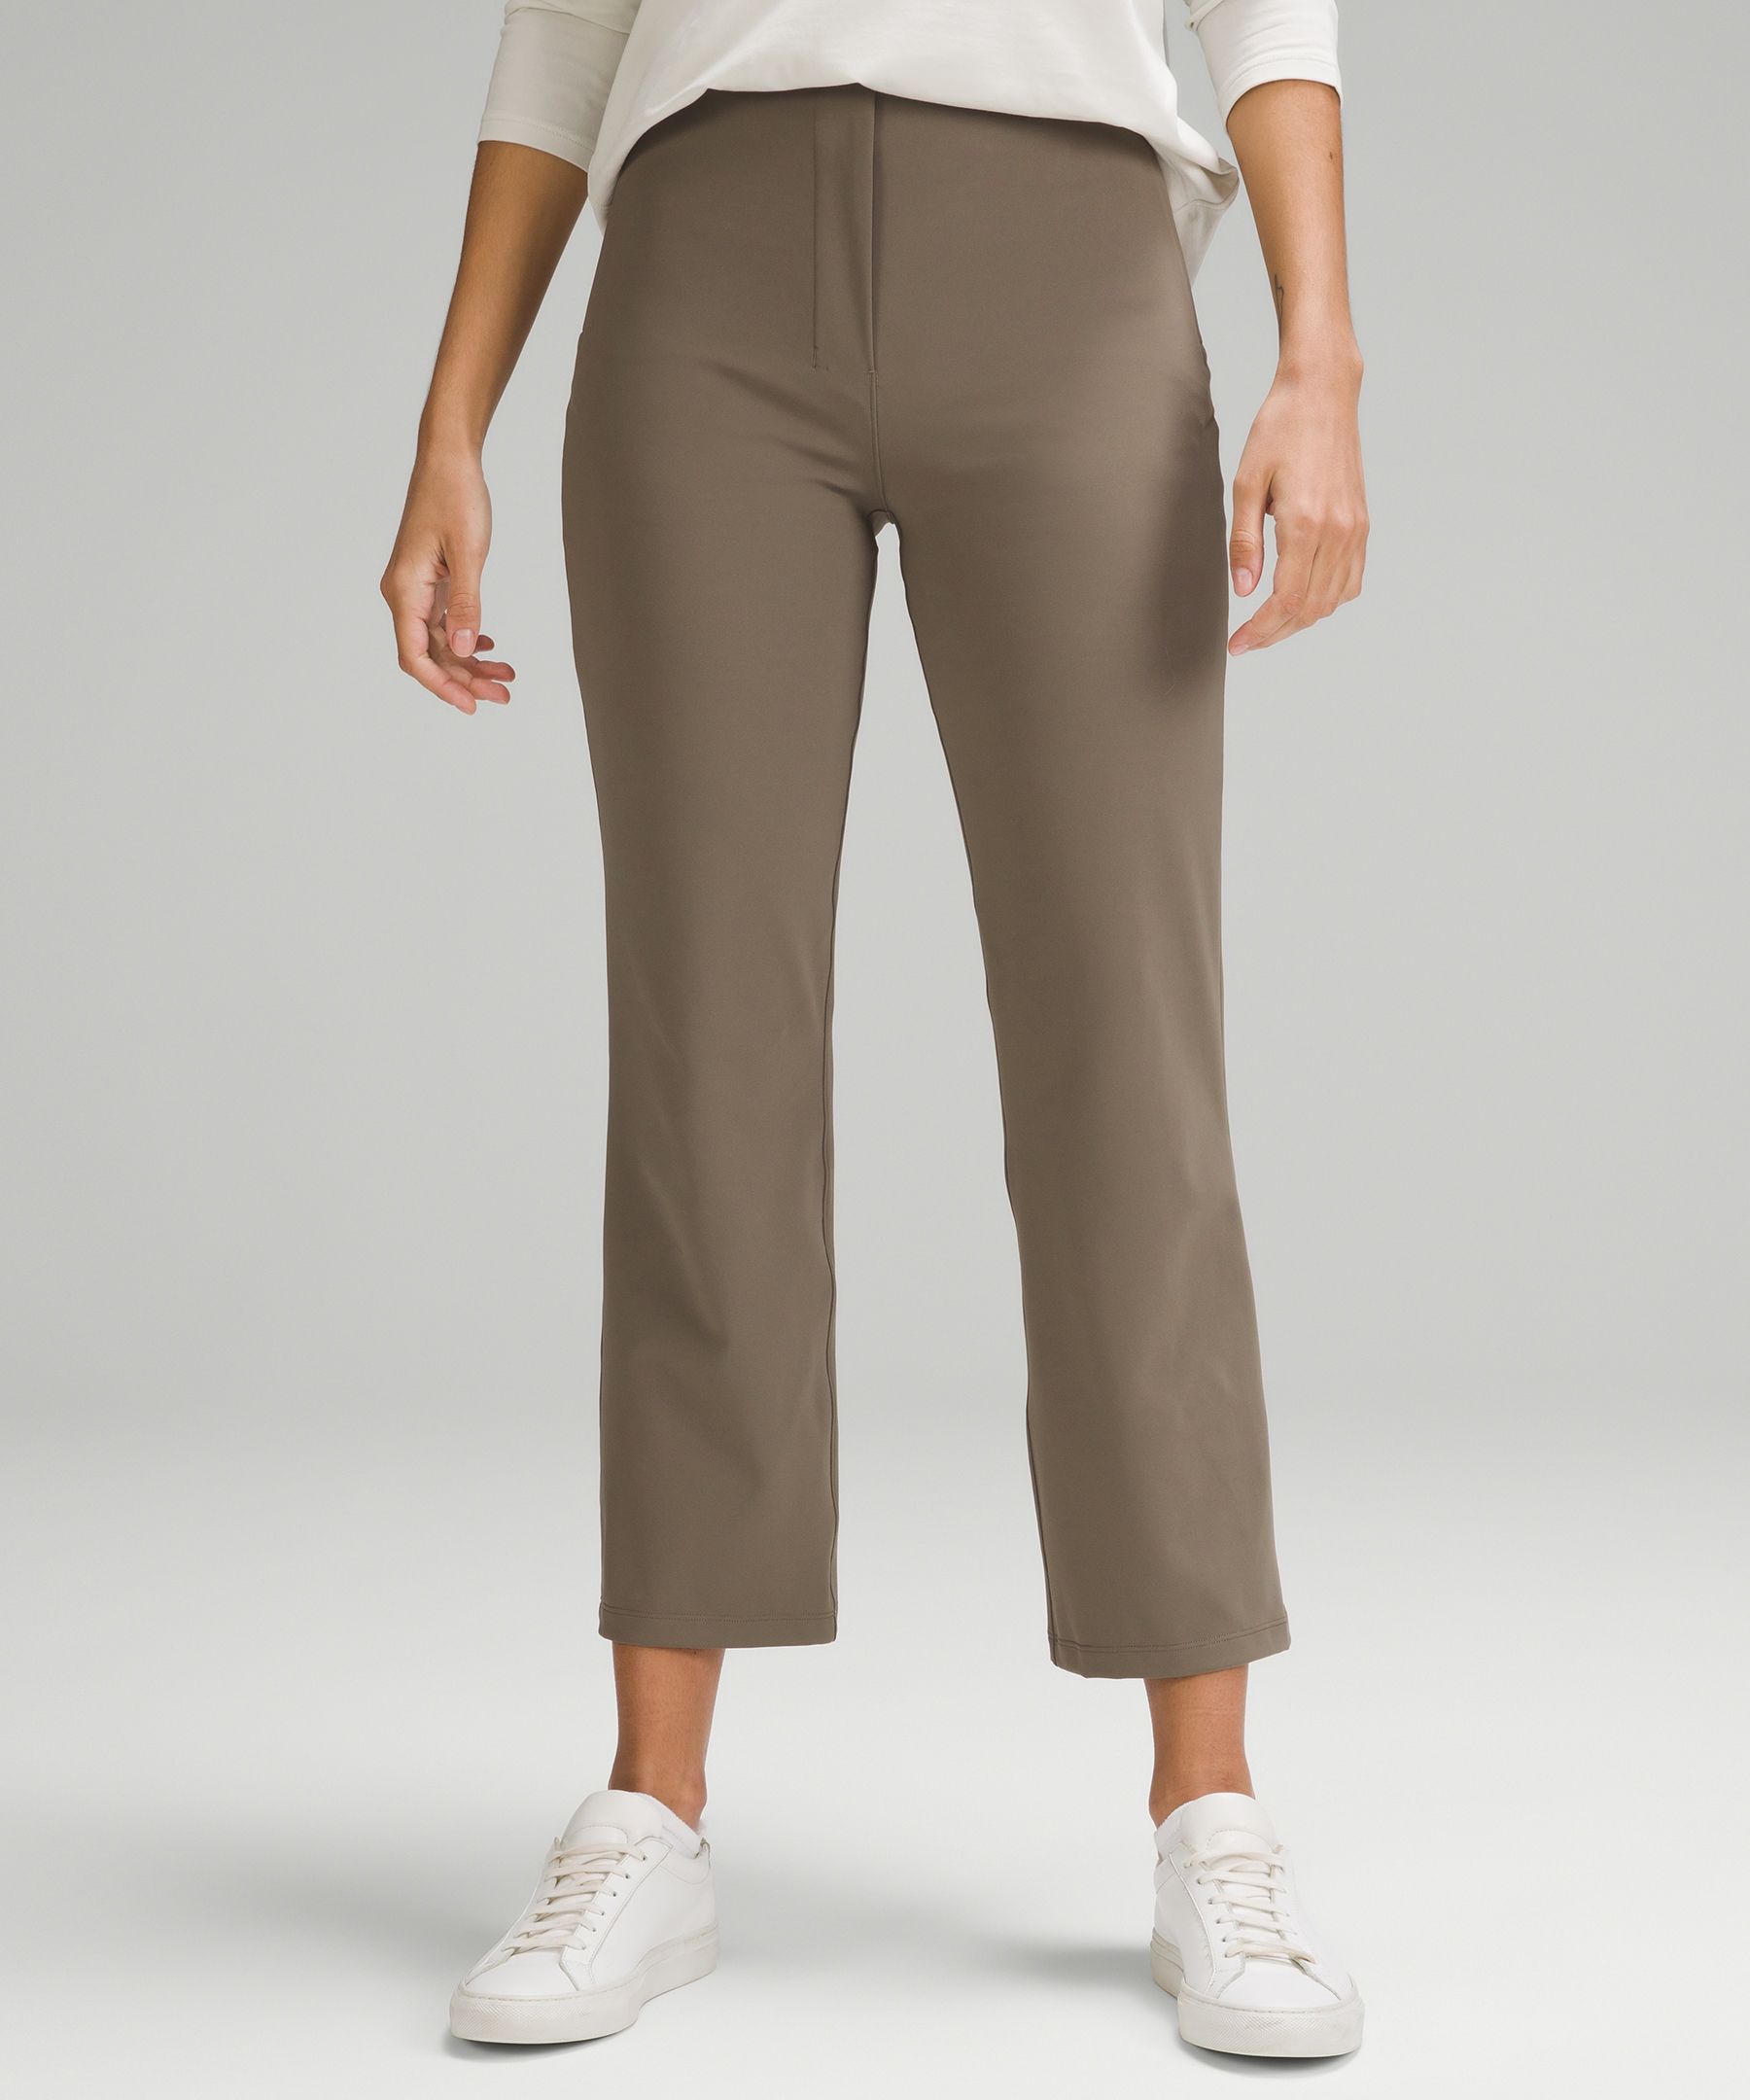 Smooth Fit Pull-On High-Rise Cropped Pant | Women's Capris | lululemon